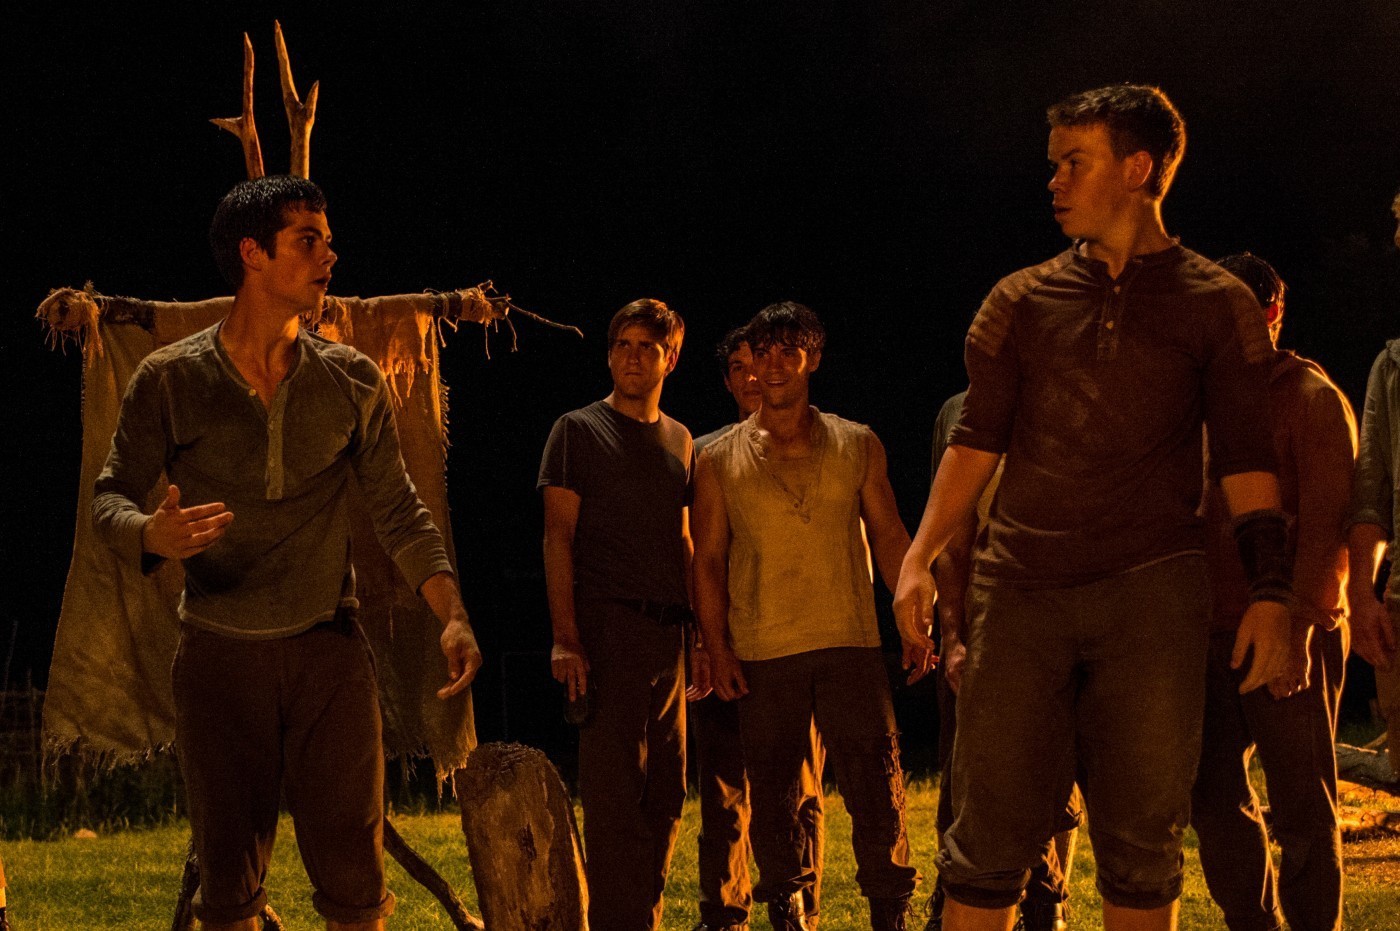 Dylan O'Brien stars as Thomas and Will Poulter stars as Gally in 20th Century Fox's The Maze Runner (2014)